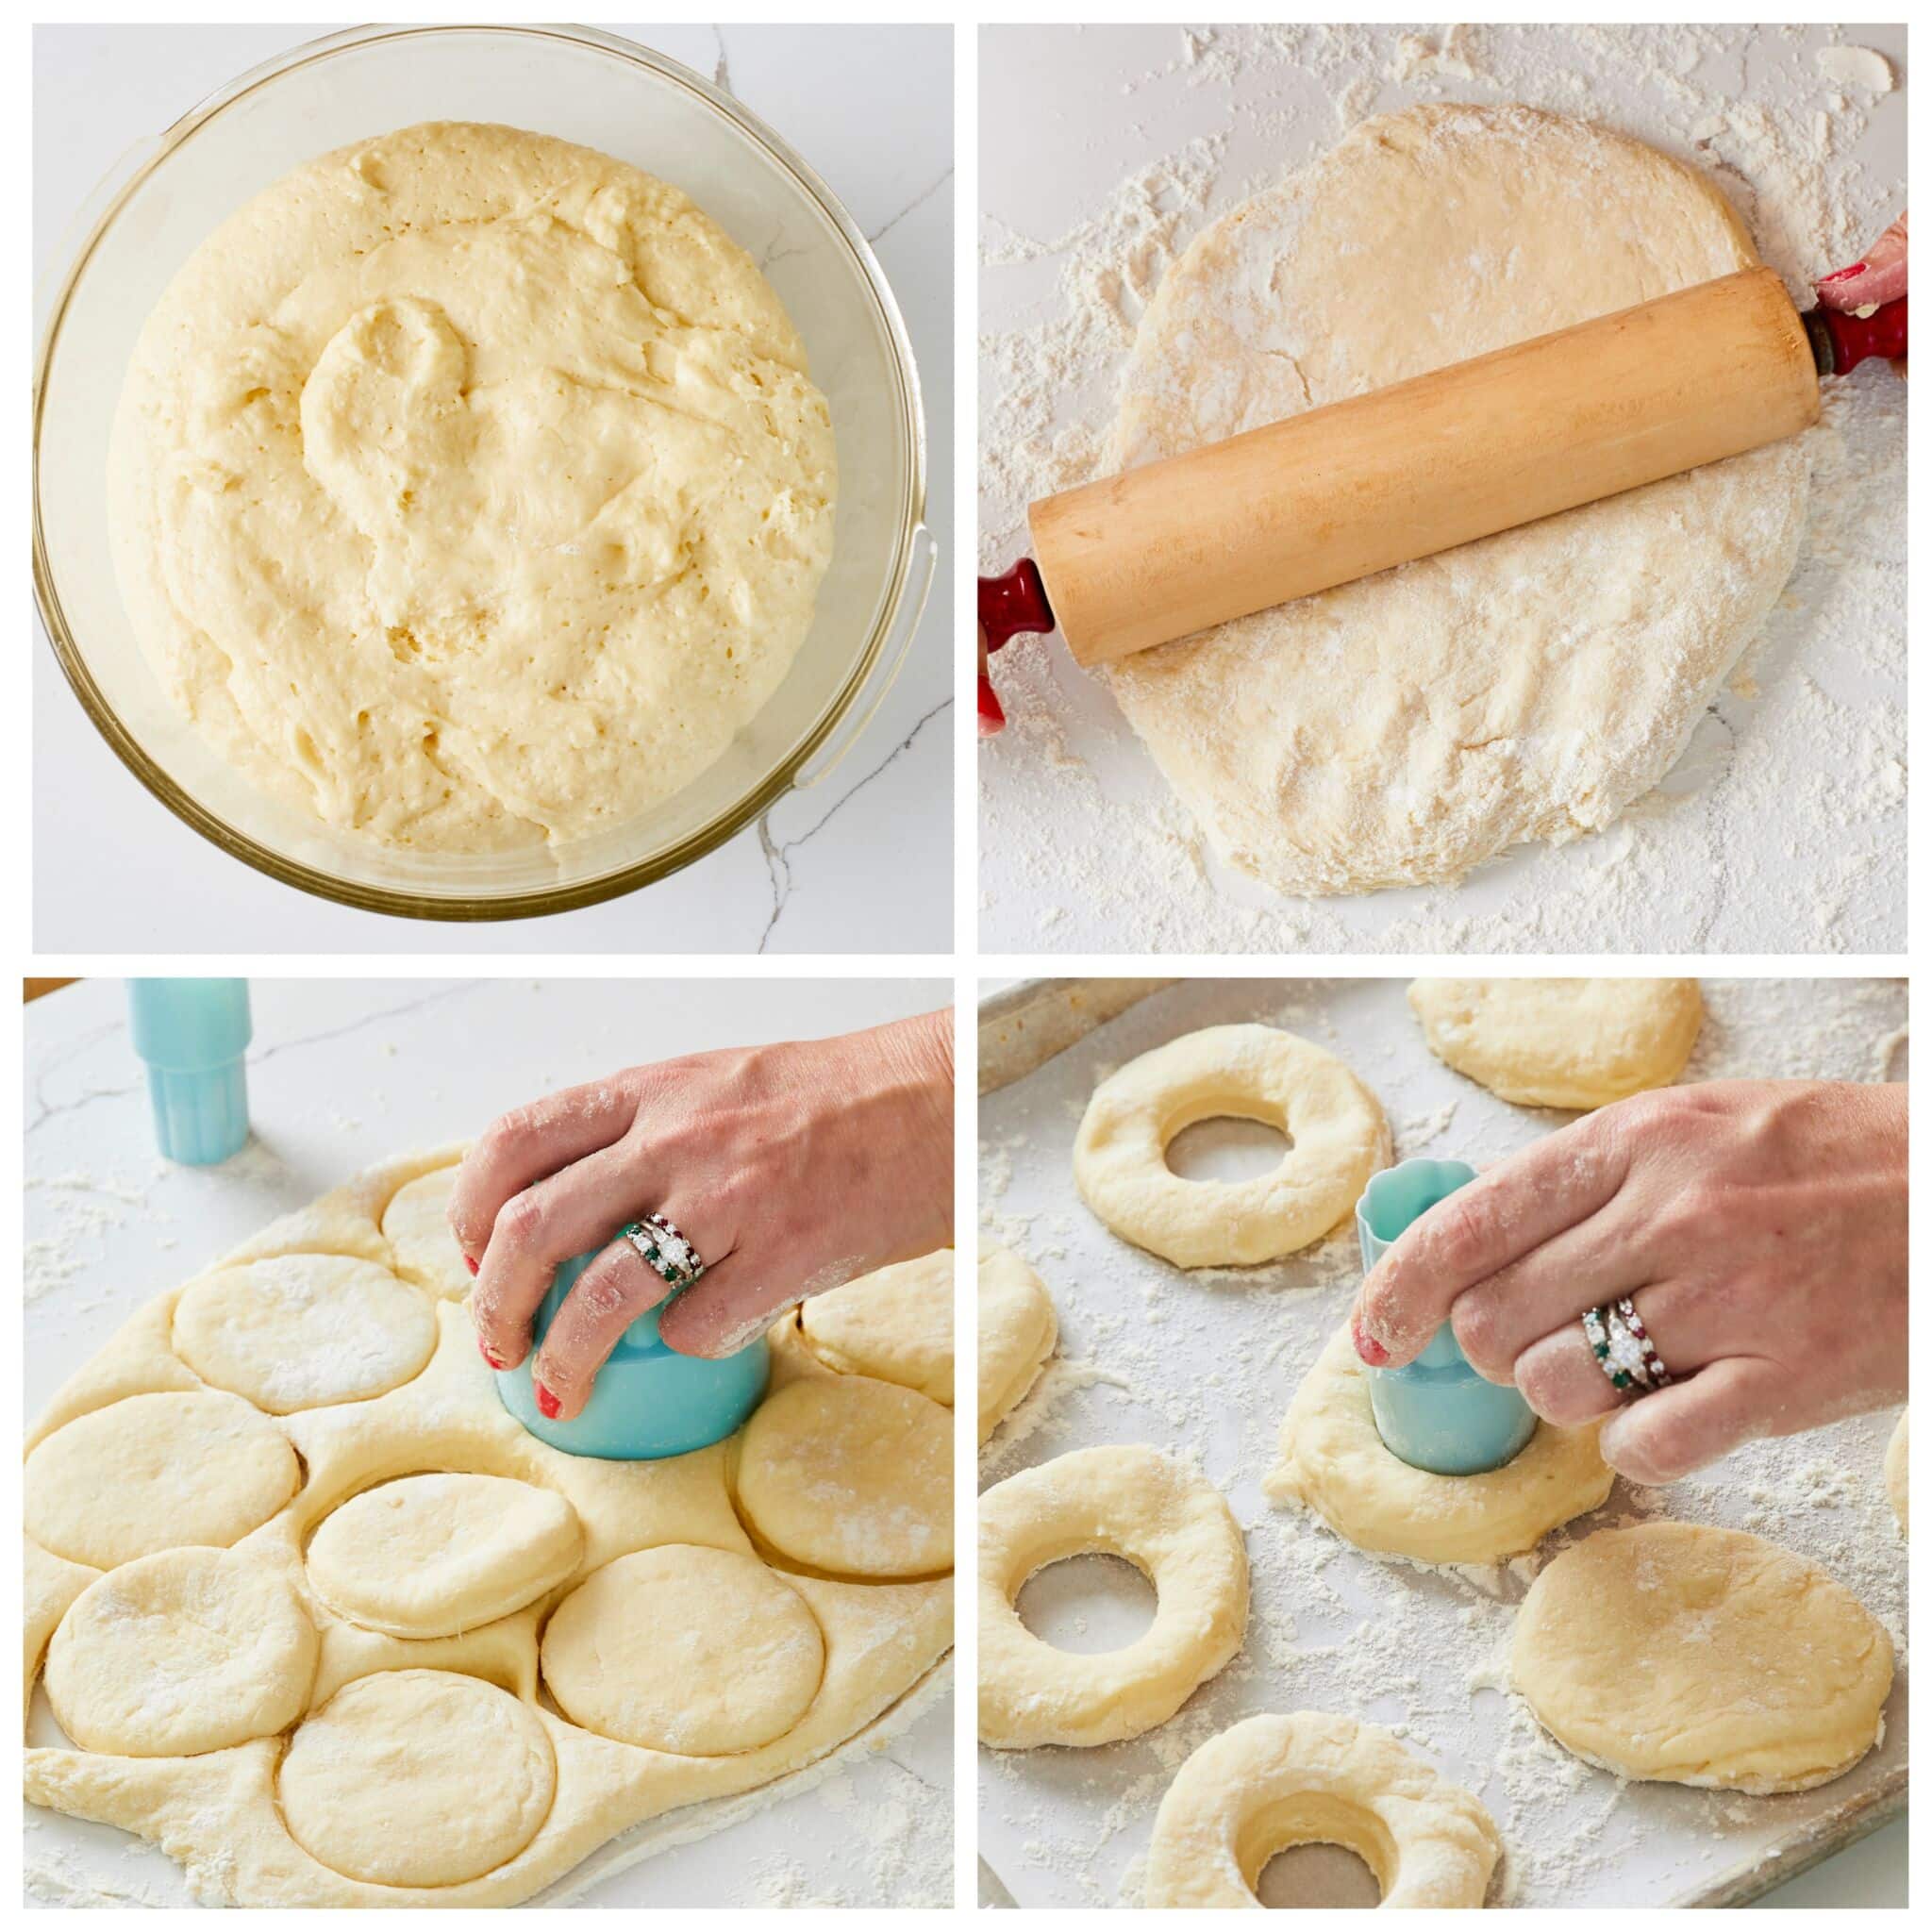 Step-by-step instructions on How to Make Homemade Krispy Kreme Donuts: Proof the dough in an oiled glass bowl until double in size. Roll the dough out to ½ inch thick. Cut out donuts using a 3-inch scone cutter and a 1-inch scone cutter. 